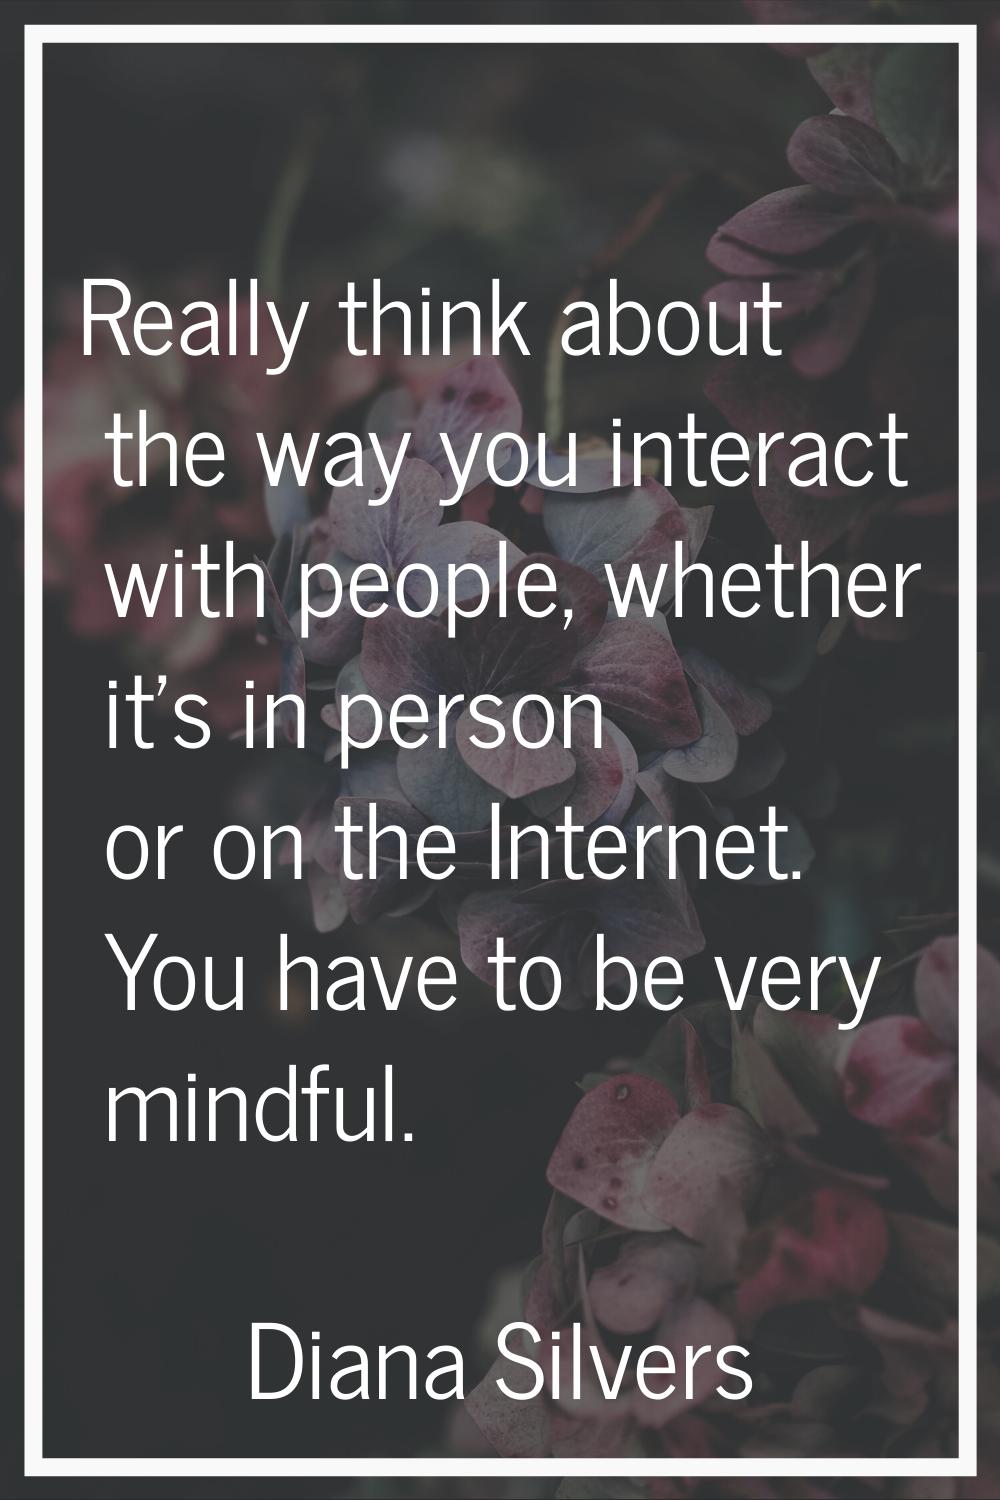 Really think about the way you interact with people, whether it's in person or on the Internet. You